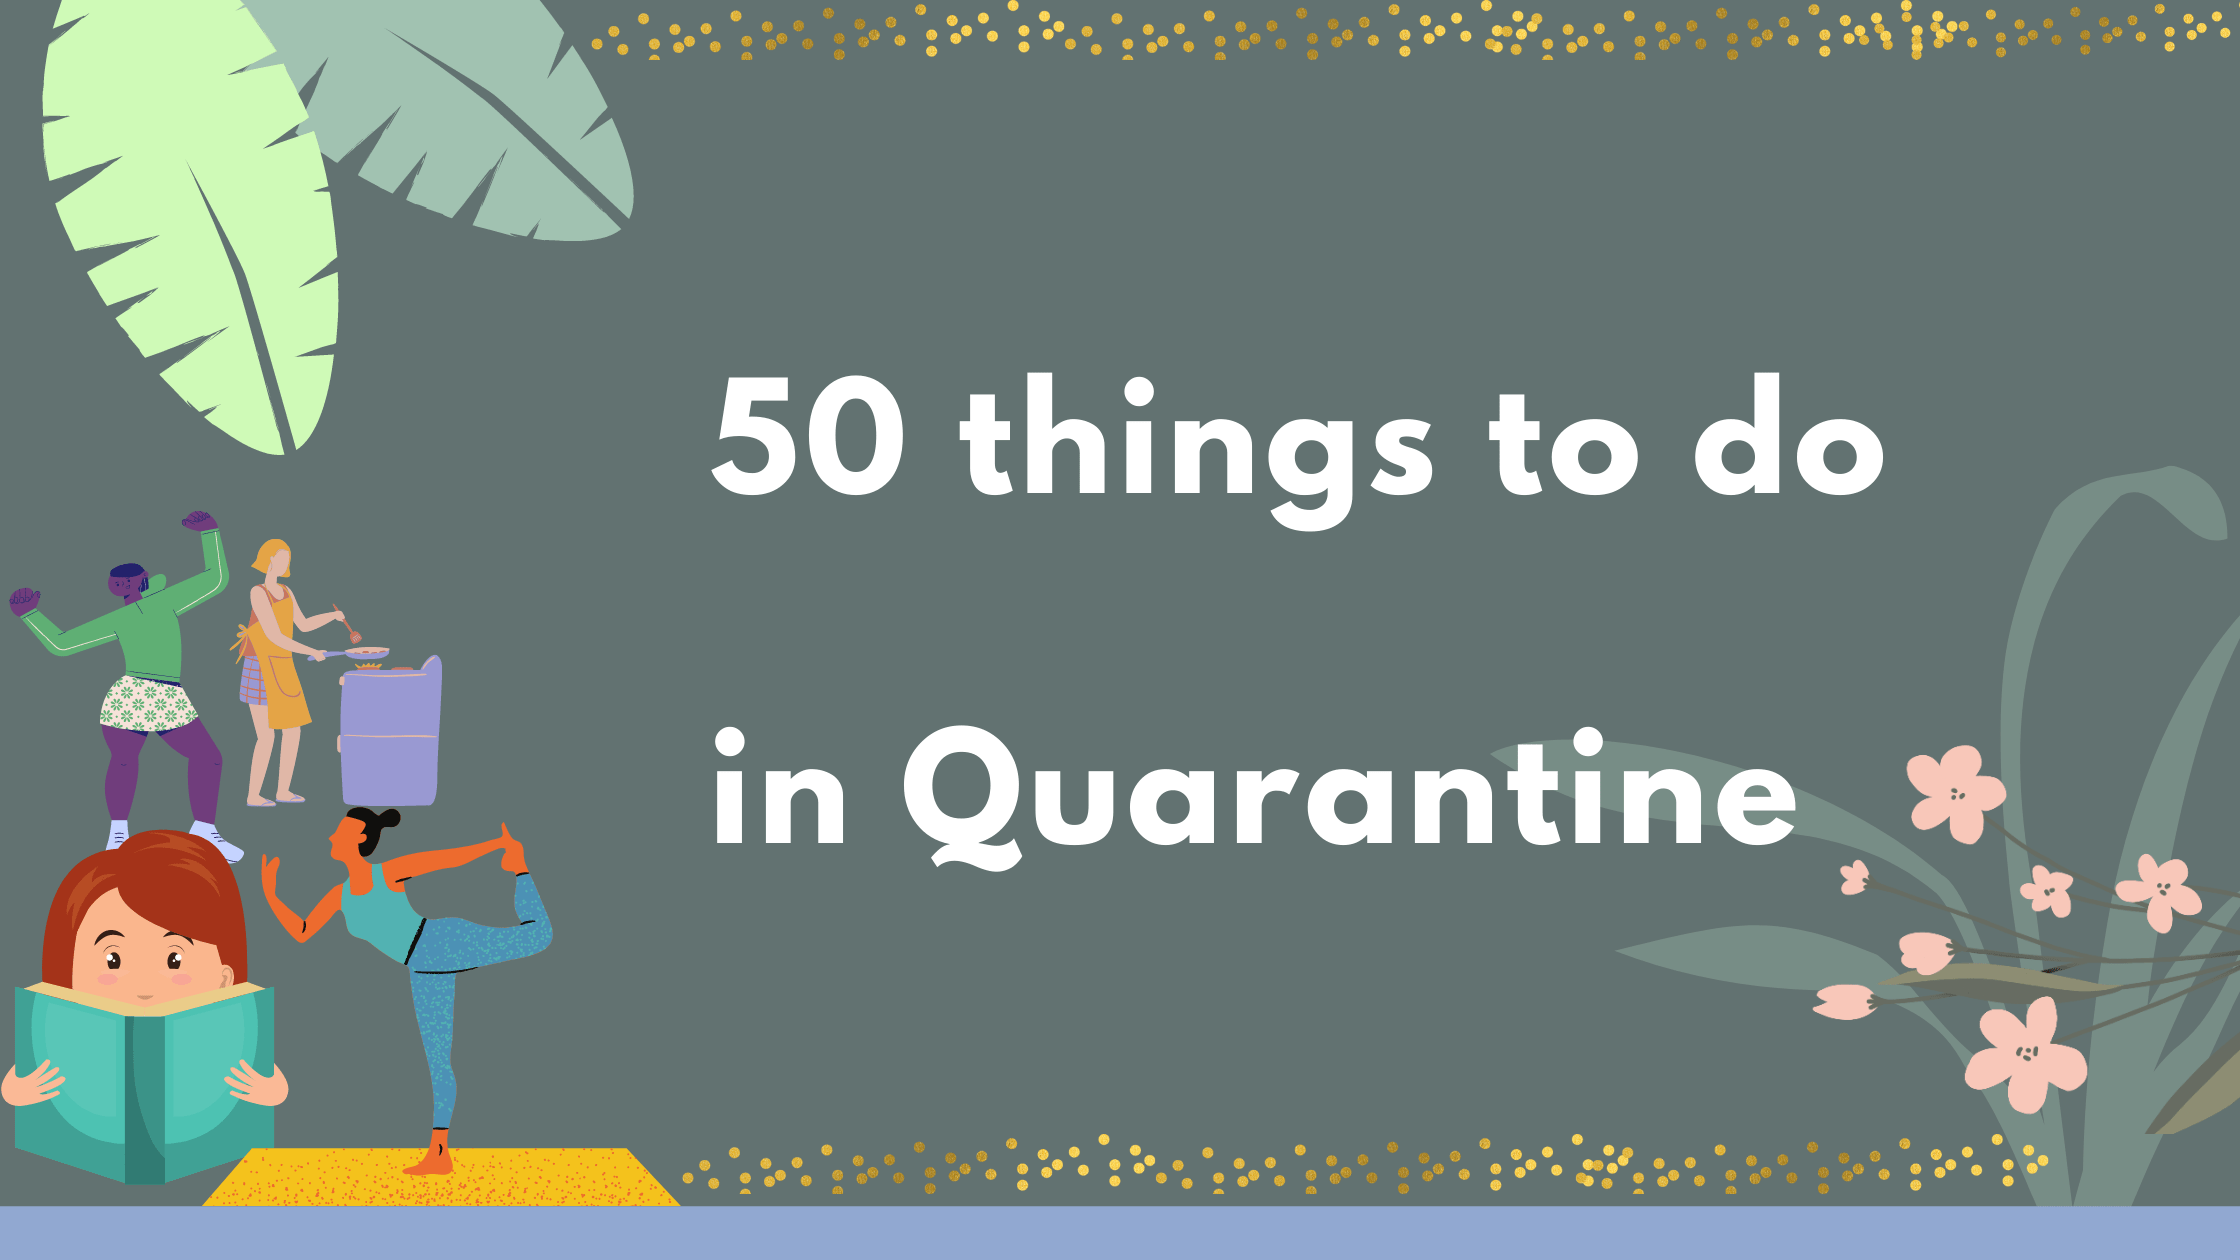 But if we keep overthinking about the situation and stop taking care of ourselves it might get worst. So here are 50 things you can do when quarantined.